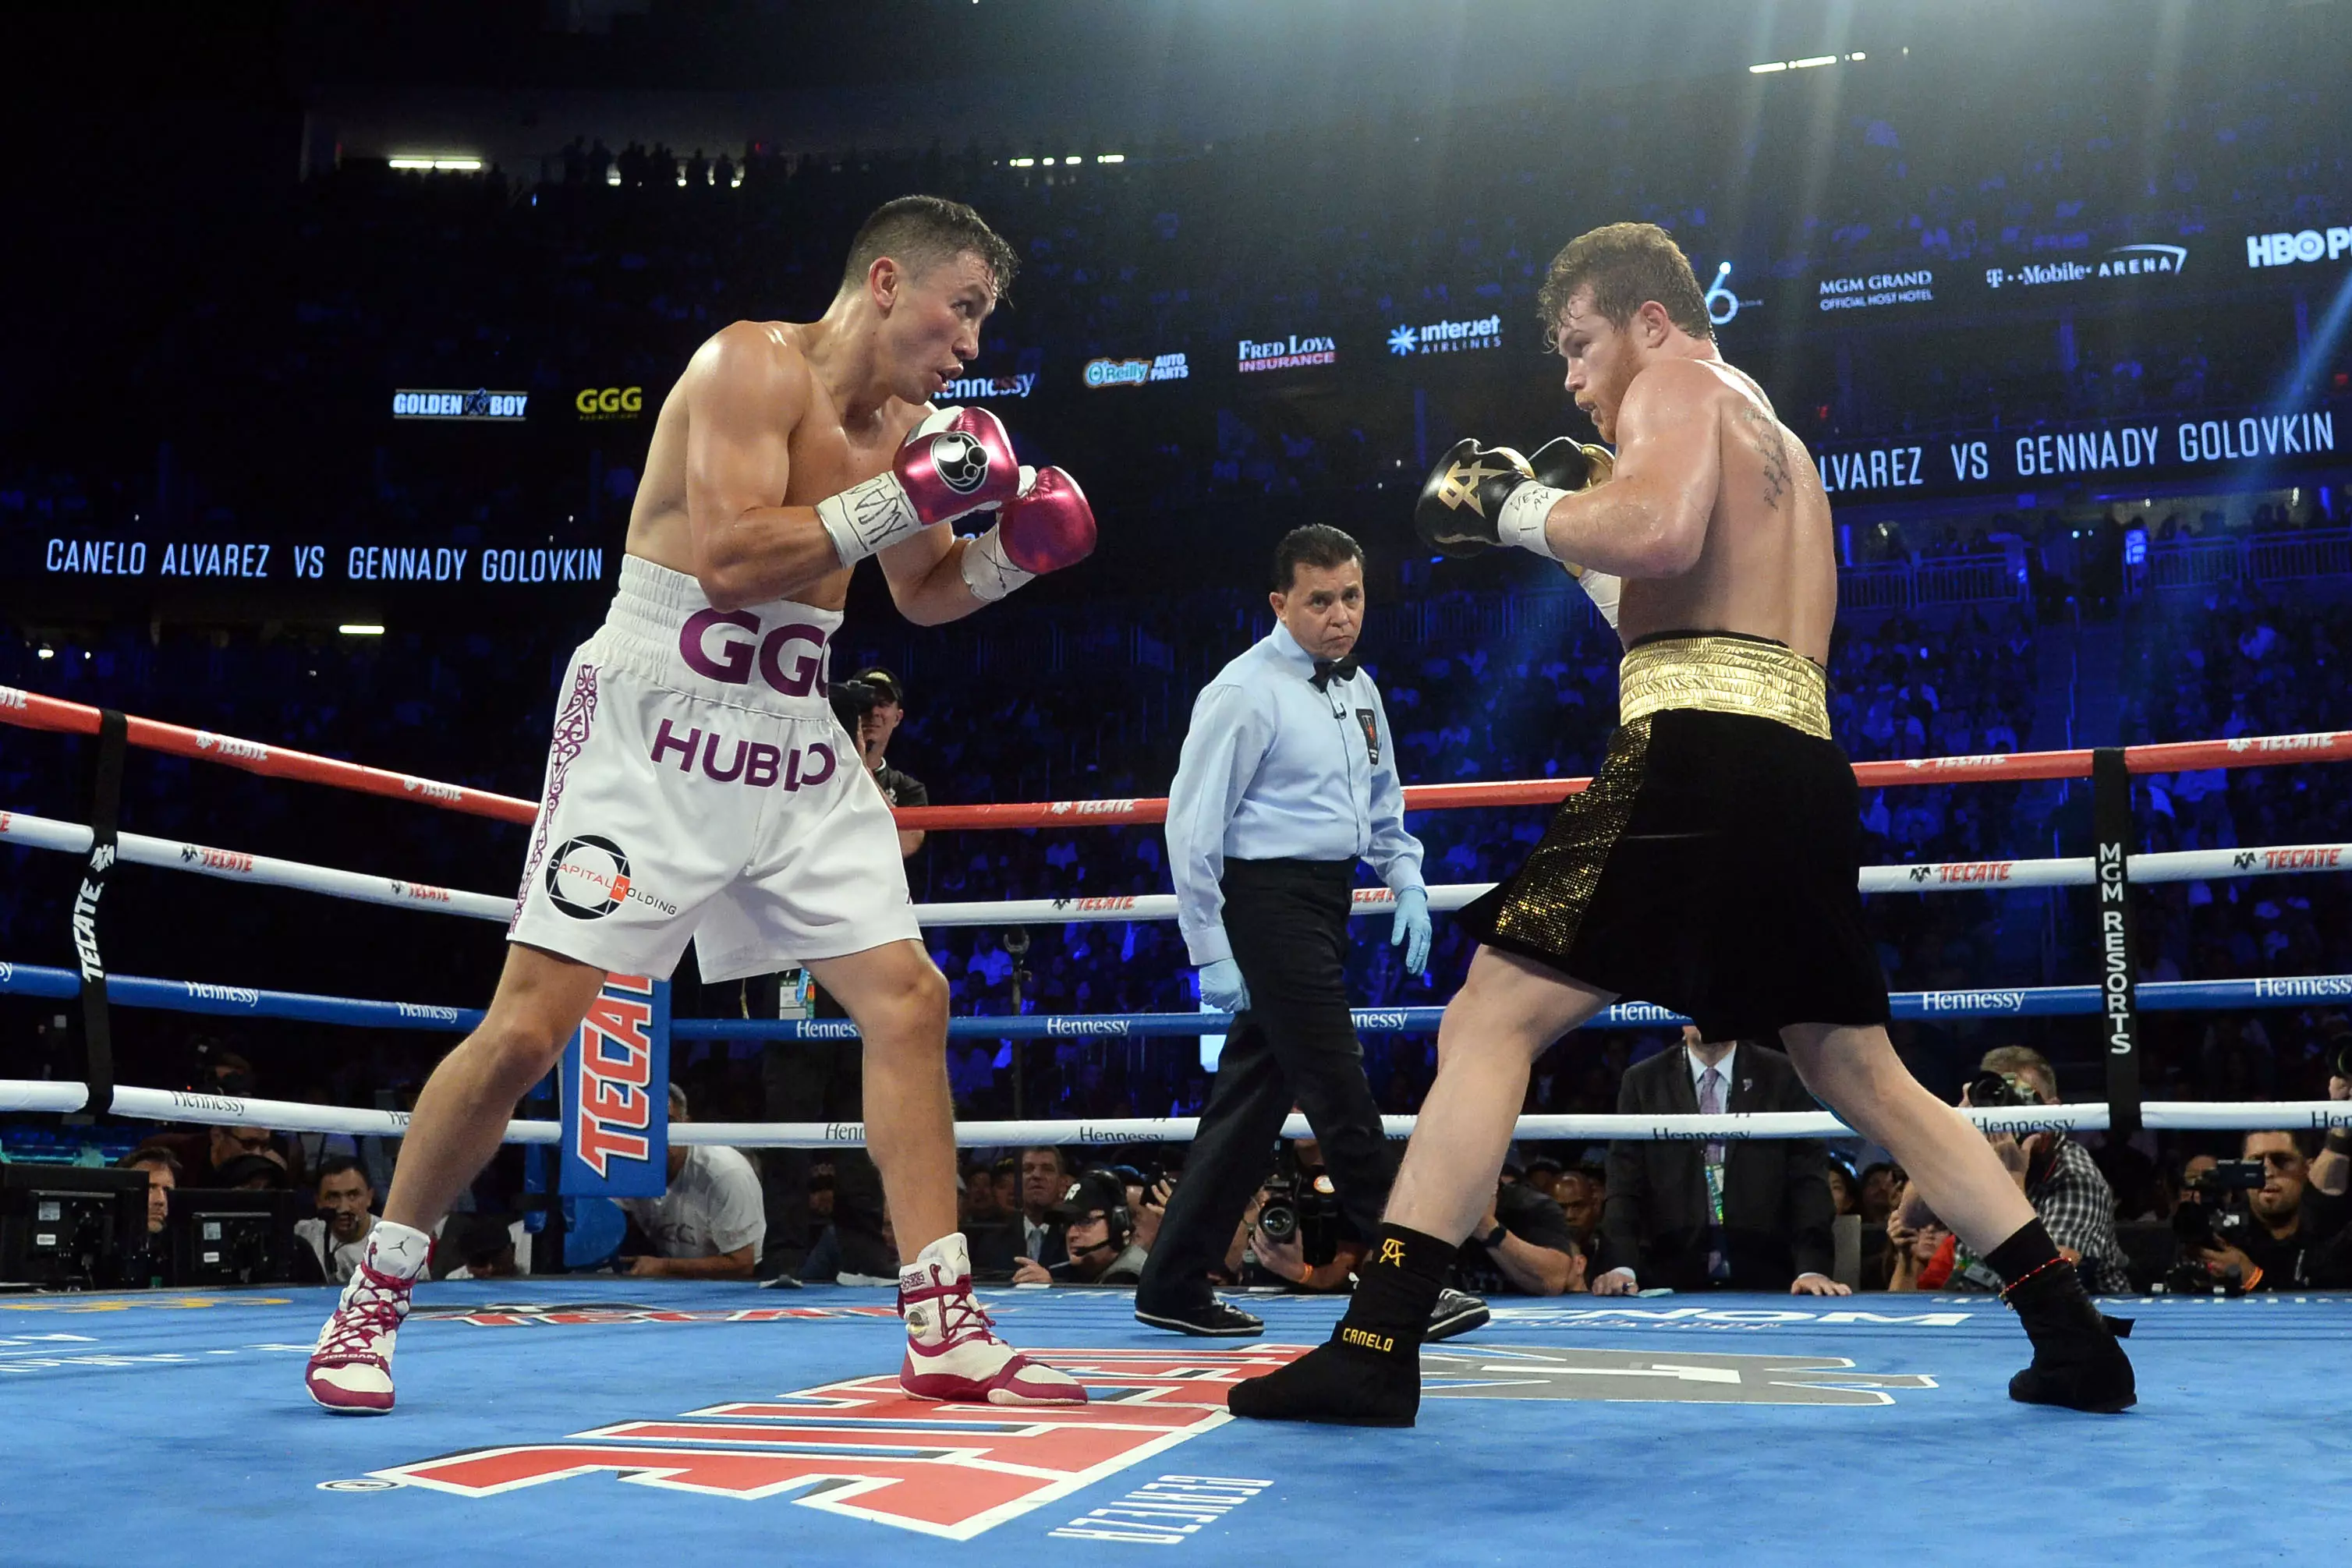 Alvarez and GGG landed big shots in both their previous fights. Image: PA Images